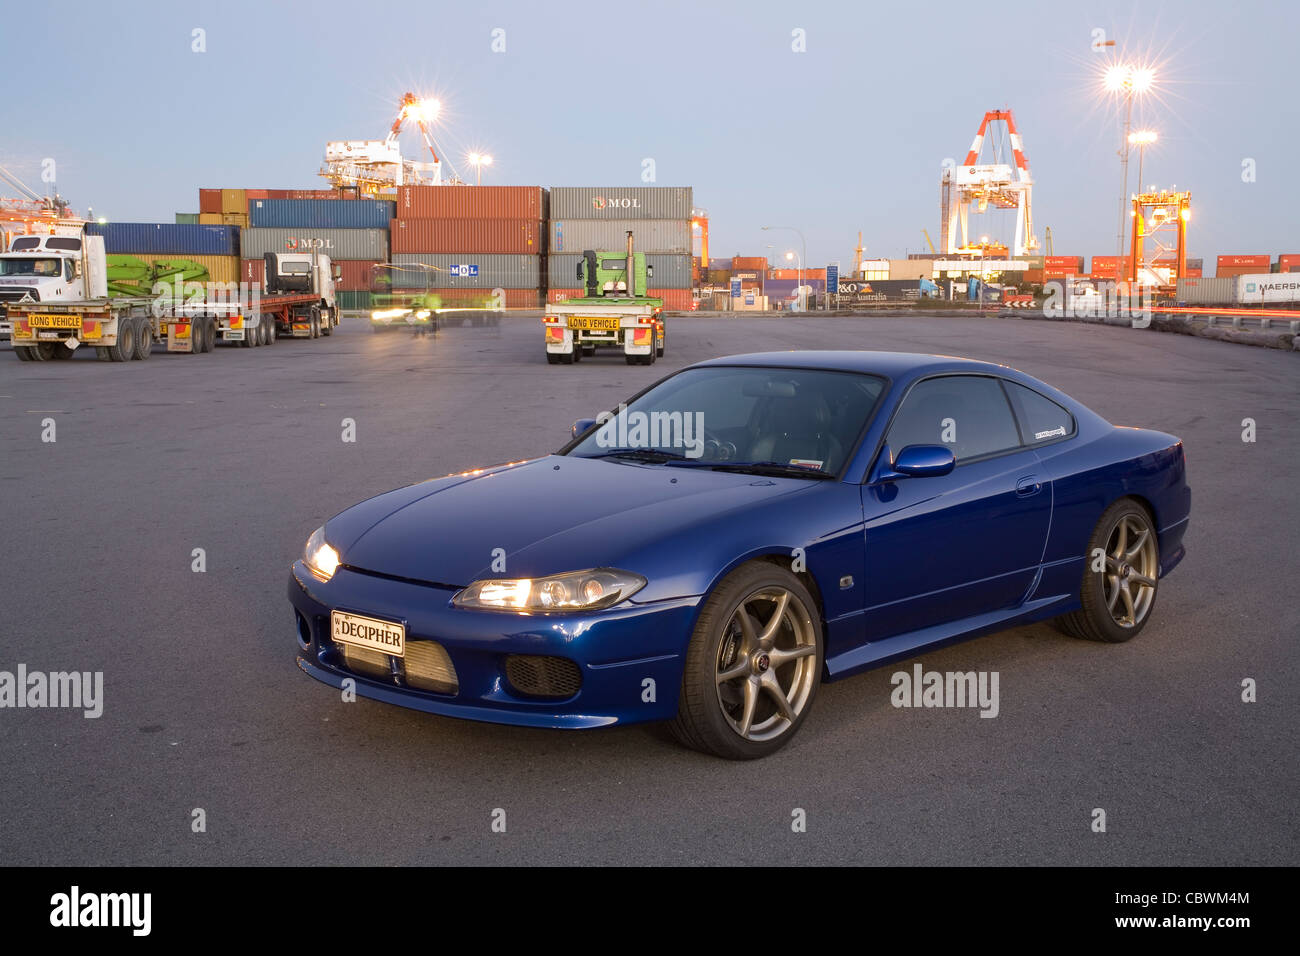 Modified and custom Nissan 200SX Japanese sports car. Stock Photo